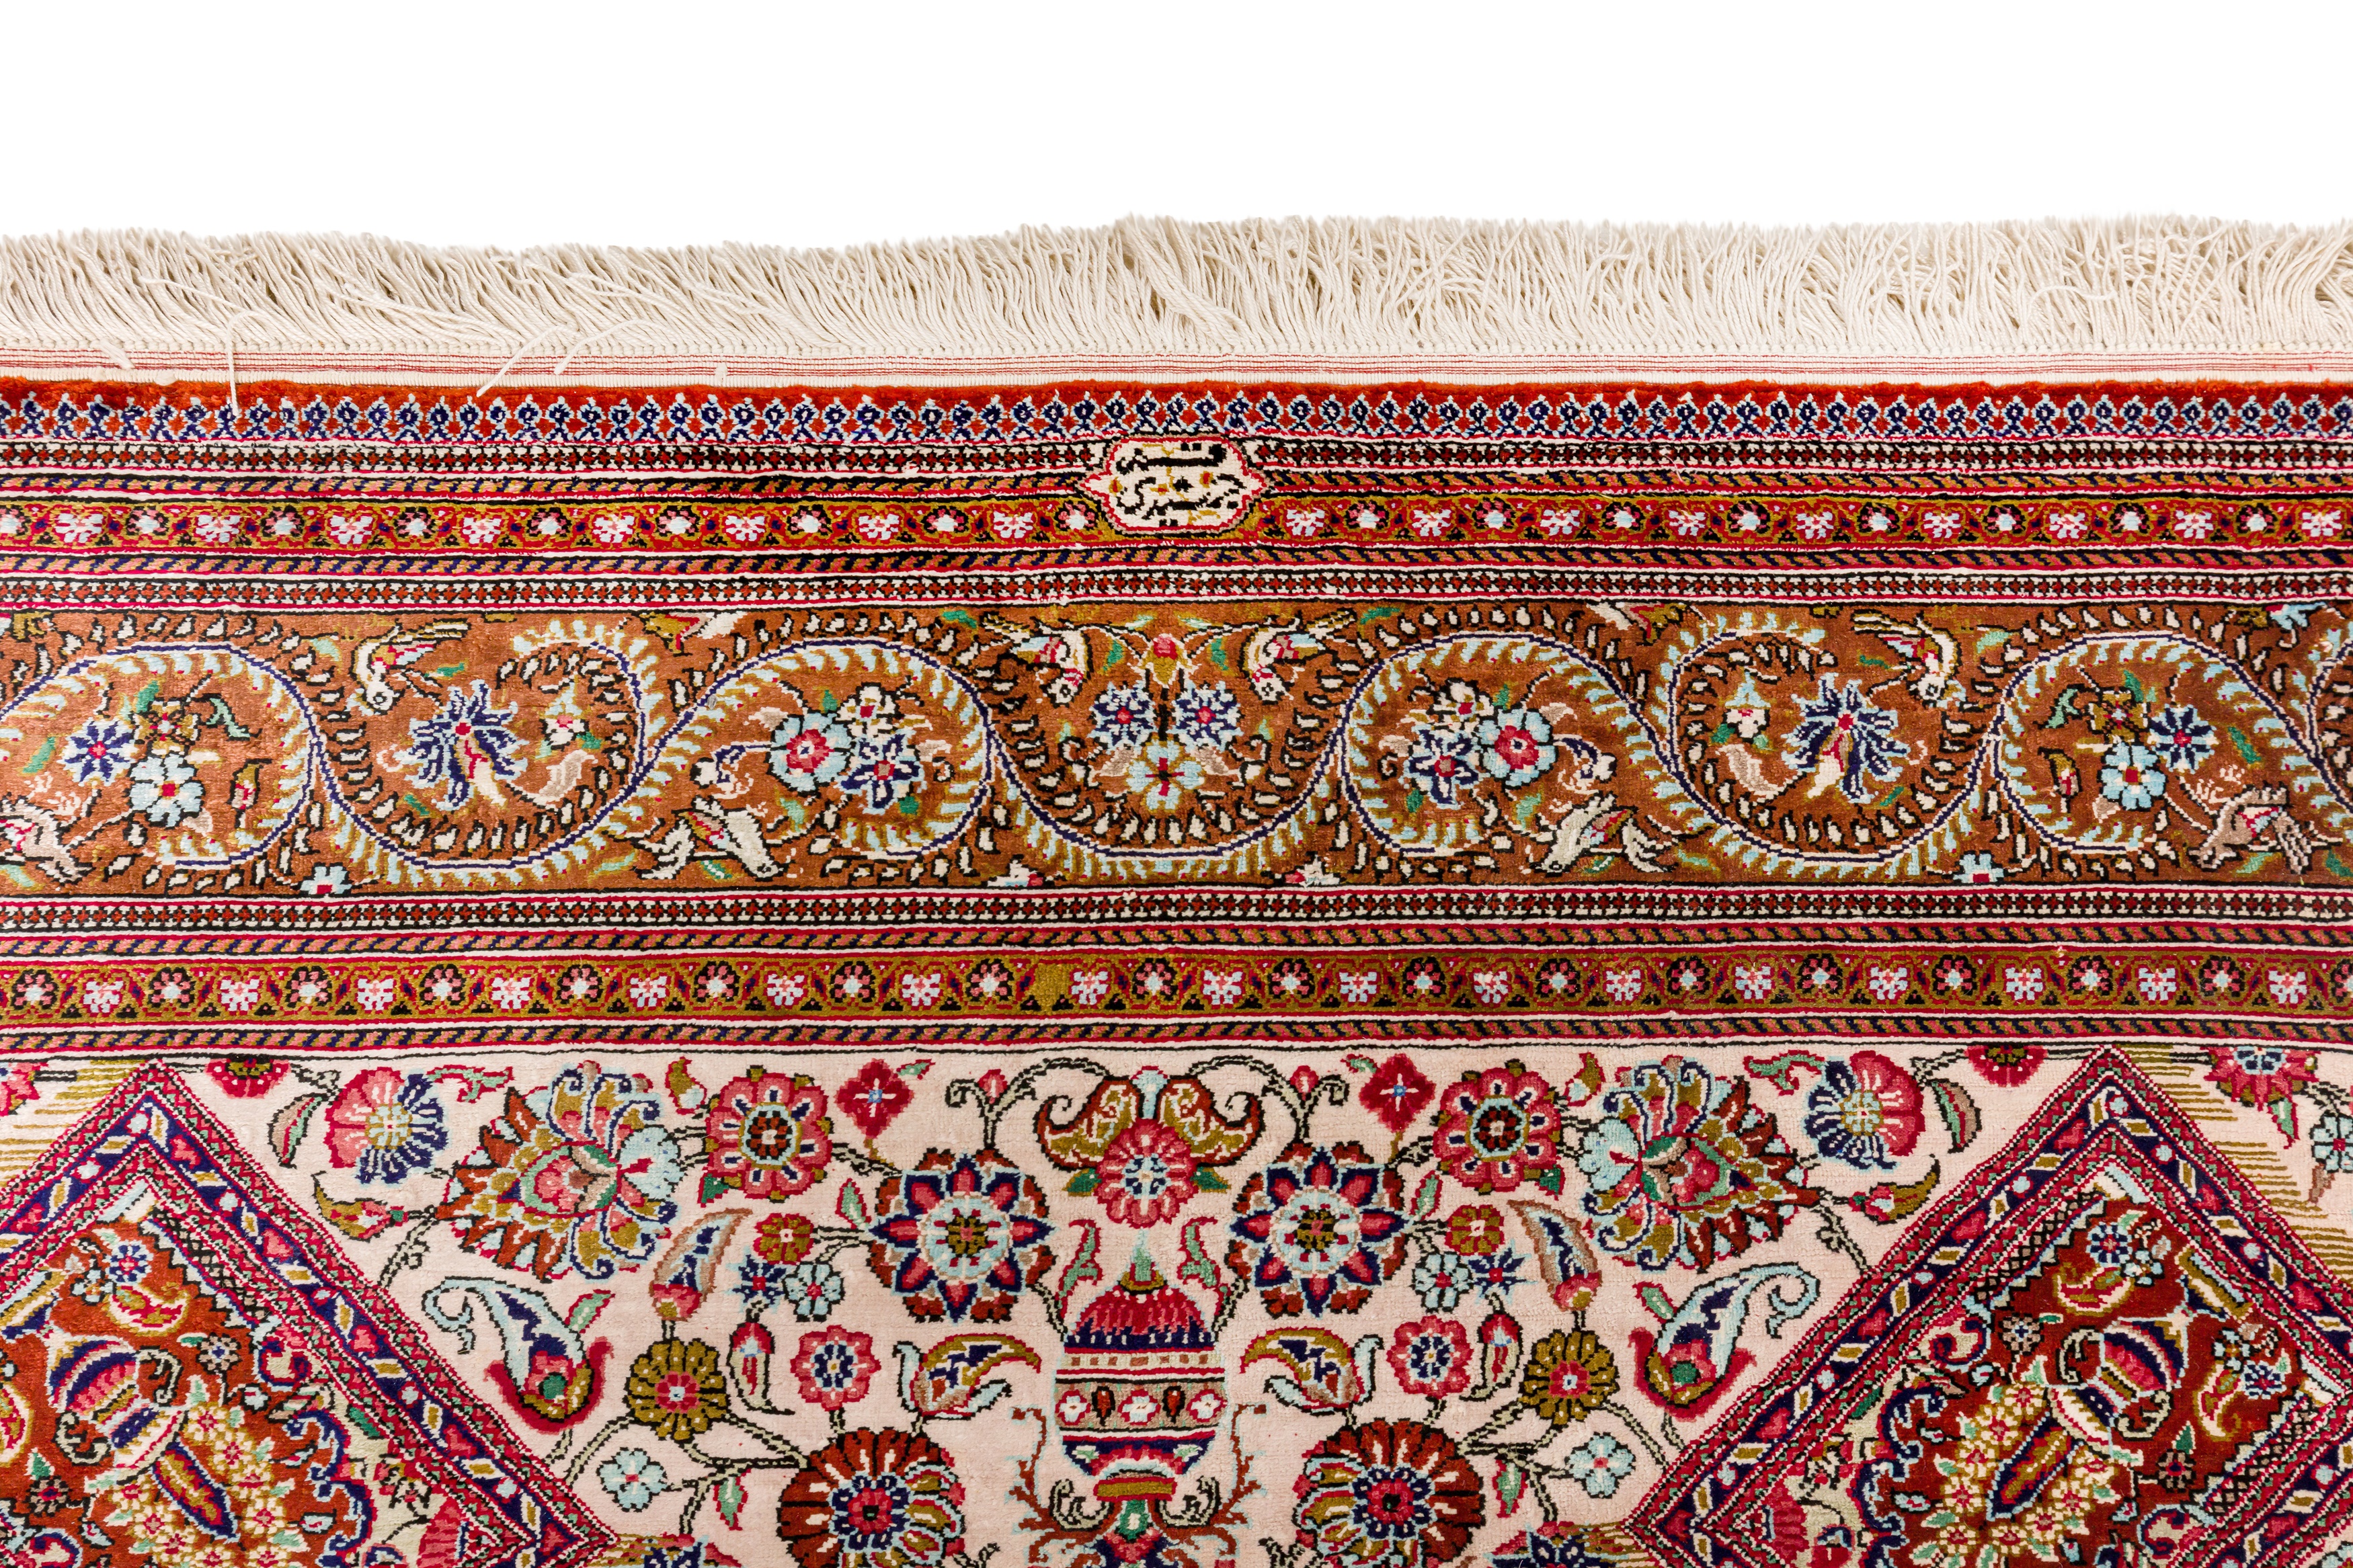 AN EXTREMELY FINE SIGNED SILK QUM RUG, CENTRAL PERSIA - Image 3 of 9